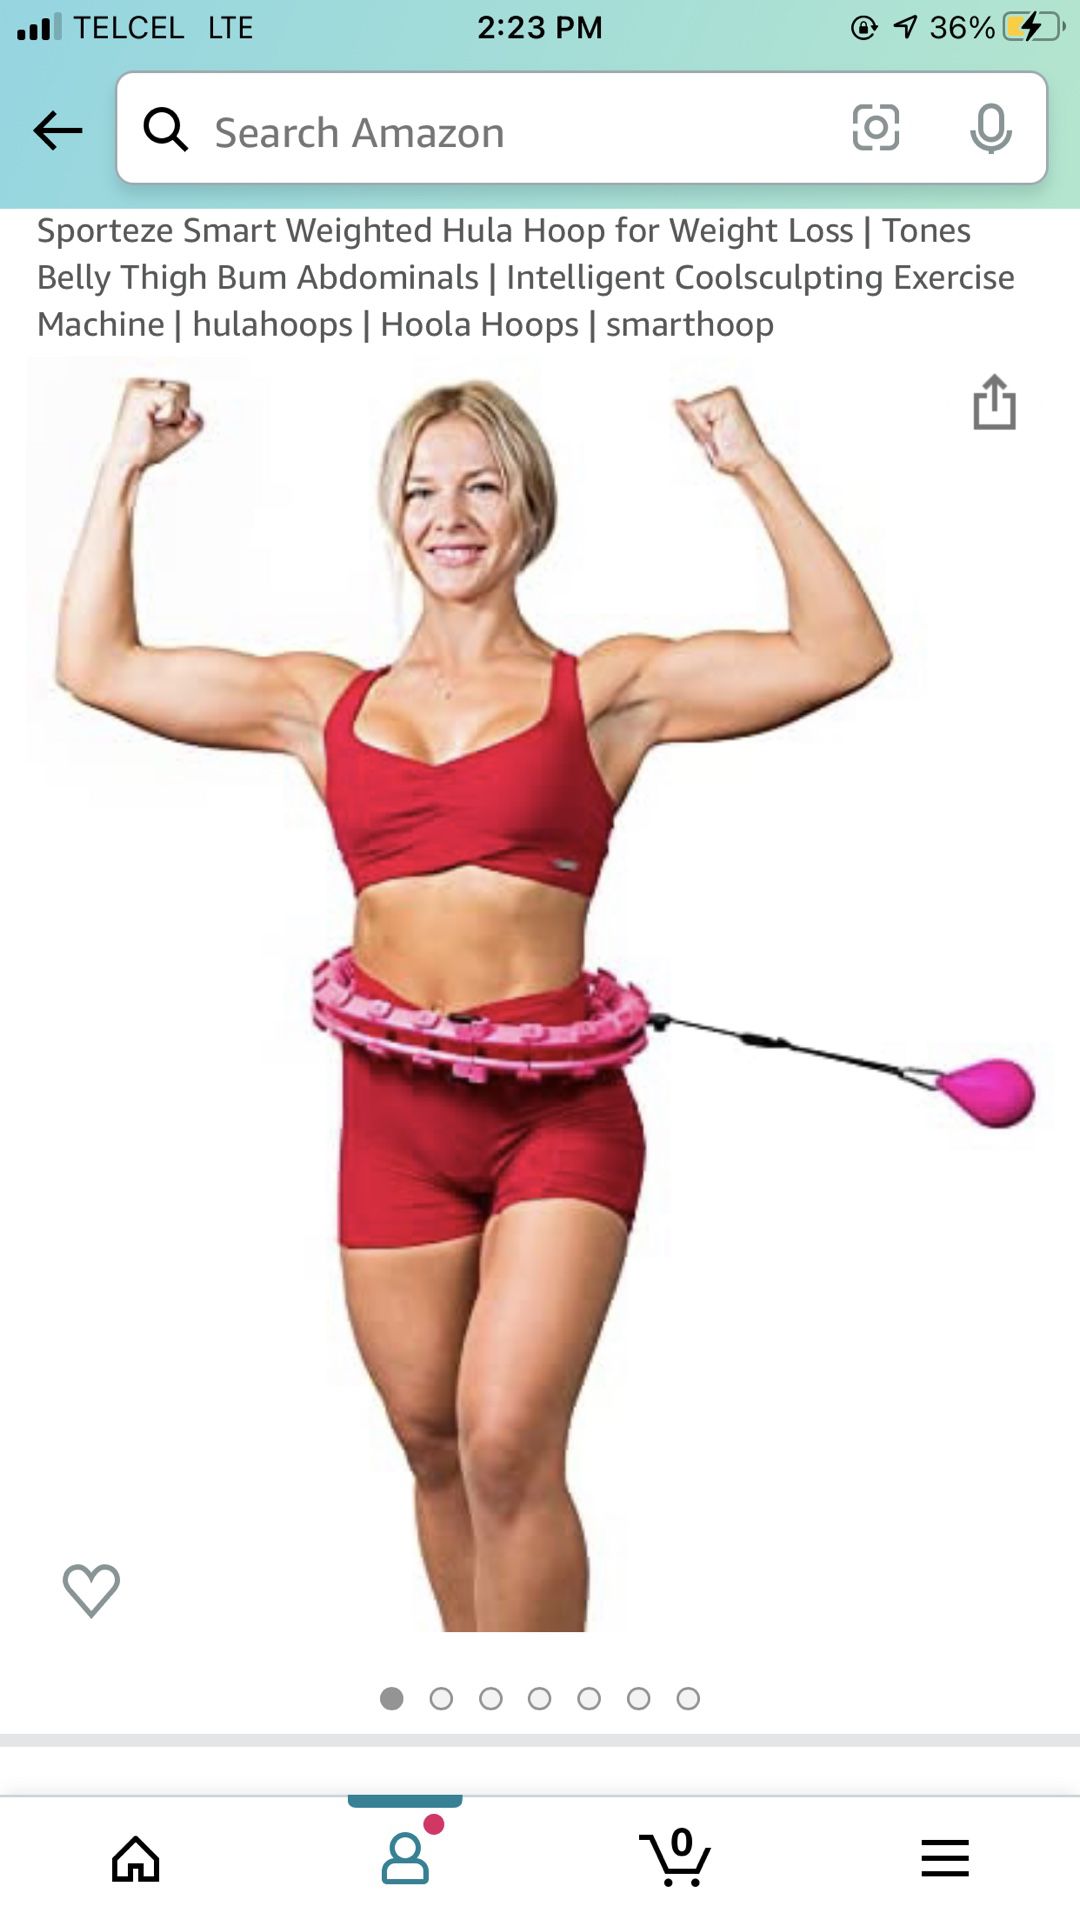 Sporteze Smart Weighted Hula Hoop for Weight Loss | Tones Belly Thigh Bum Abdominals | Intelligent Coolsculpting Exercise Machine | hulahoops | Hoola 